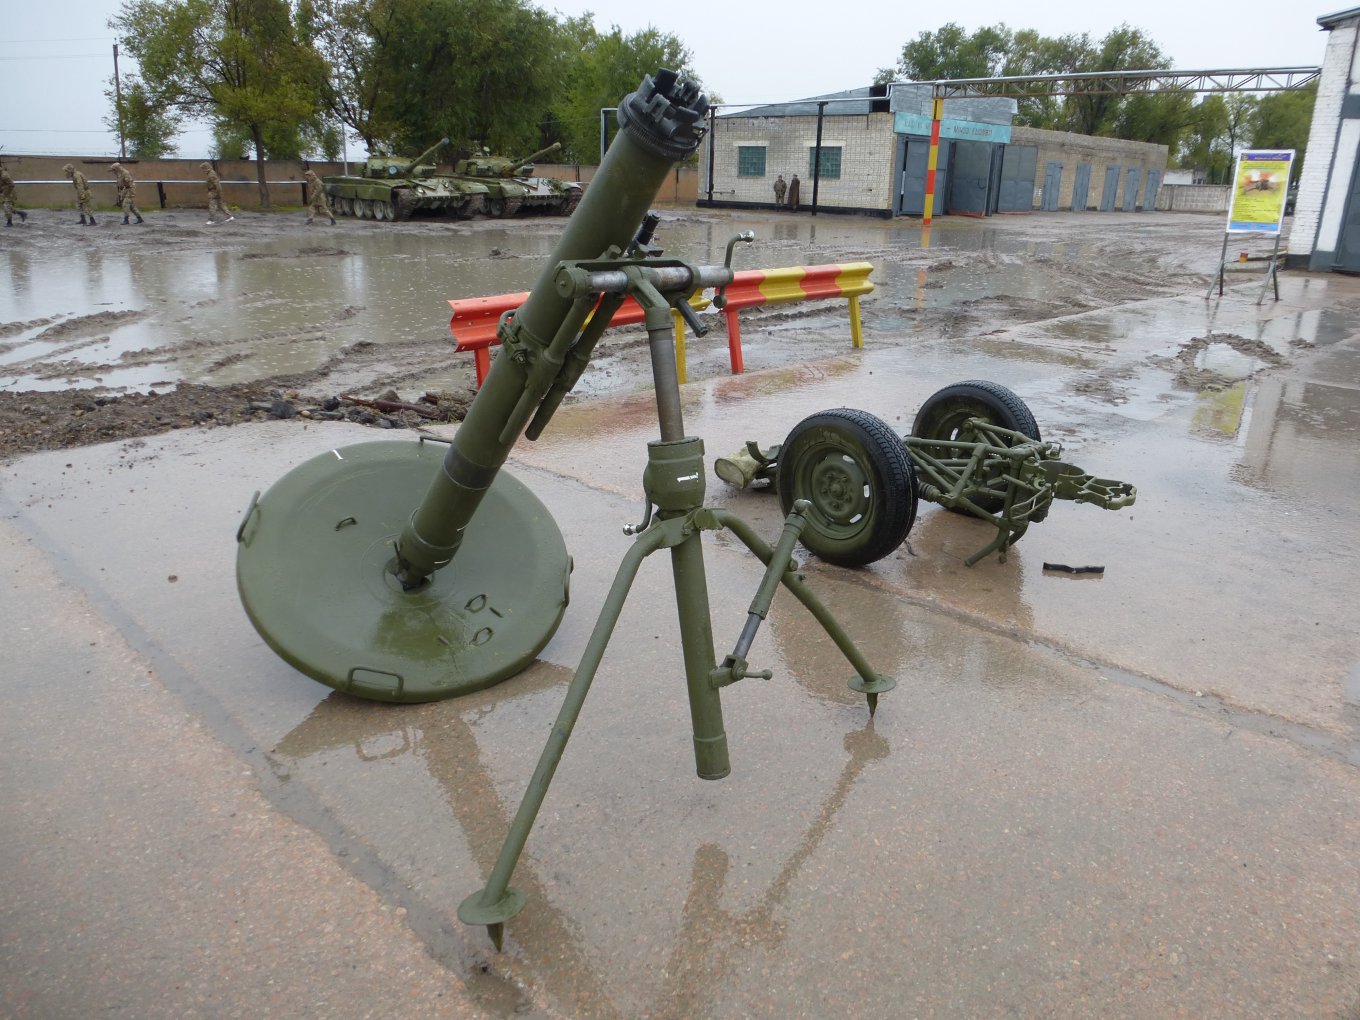 Soviet-tipe 2B11 mortar, Lithuania Handed Over Heavy Mortars to Ukraine, What Could Be the Options,Defense Express